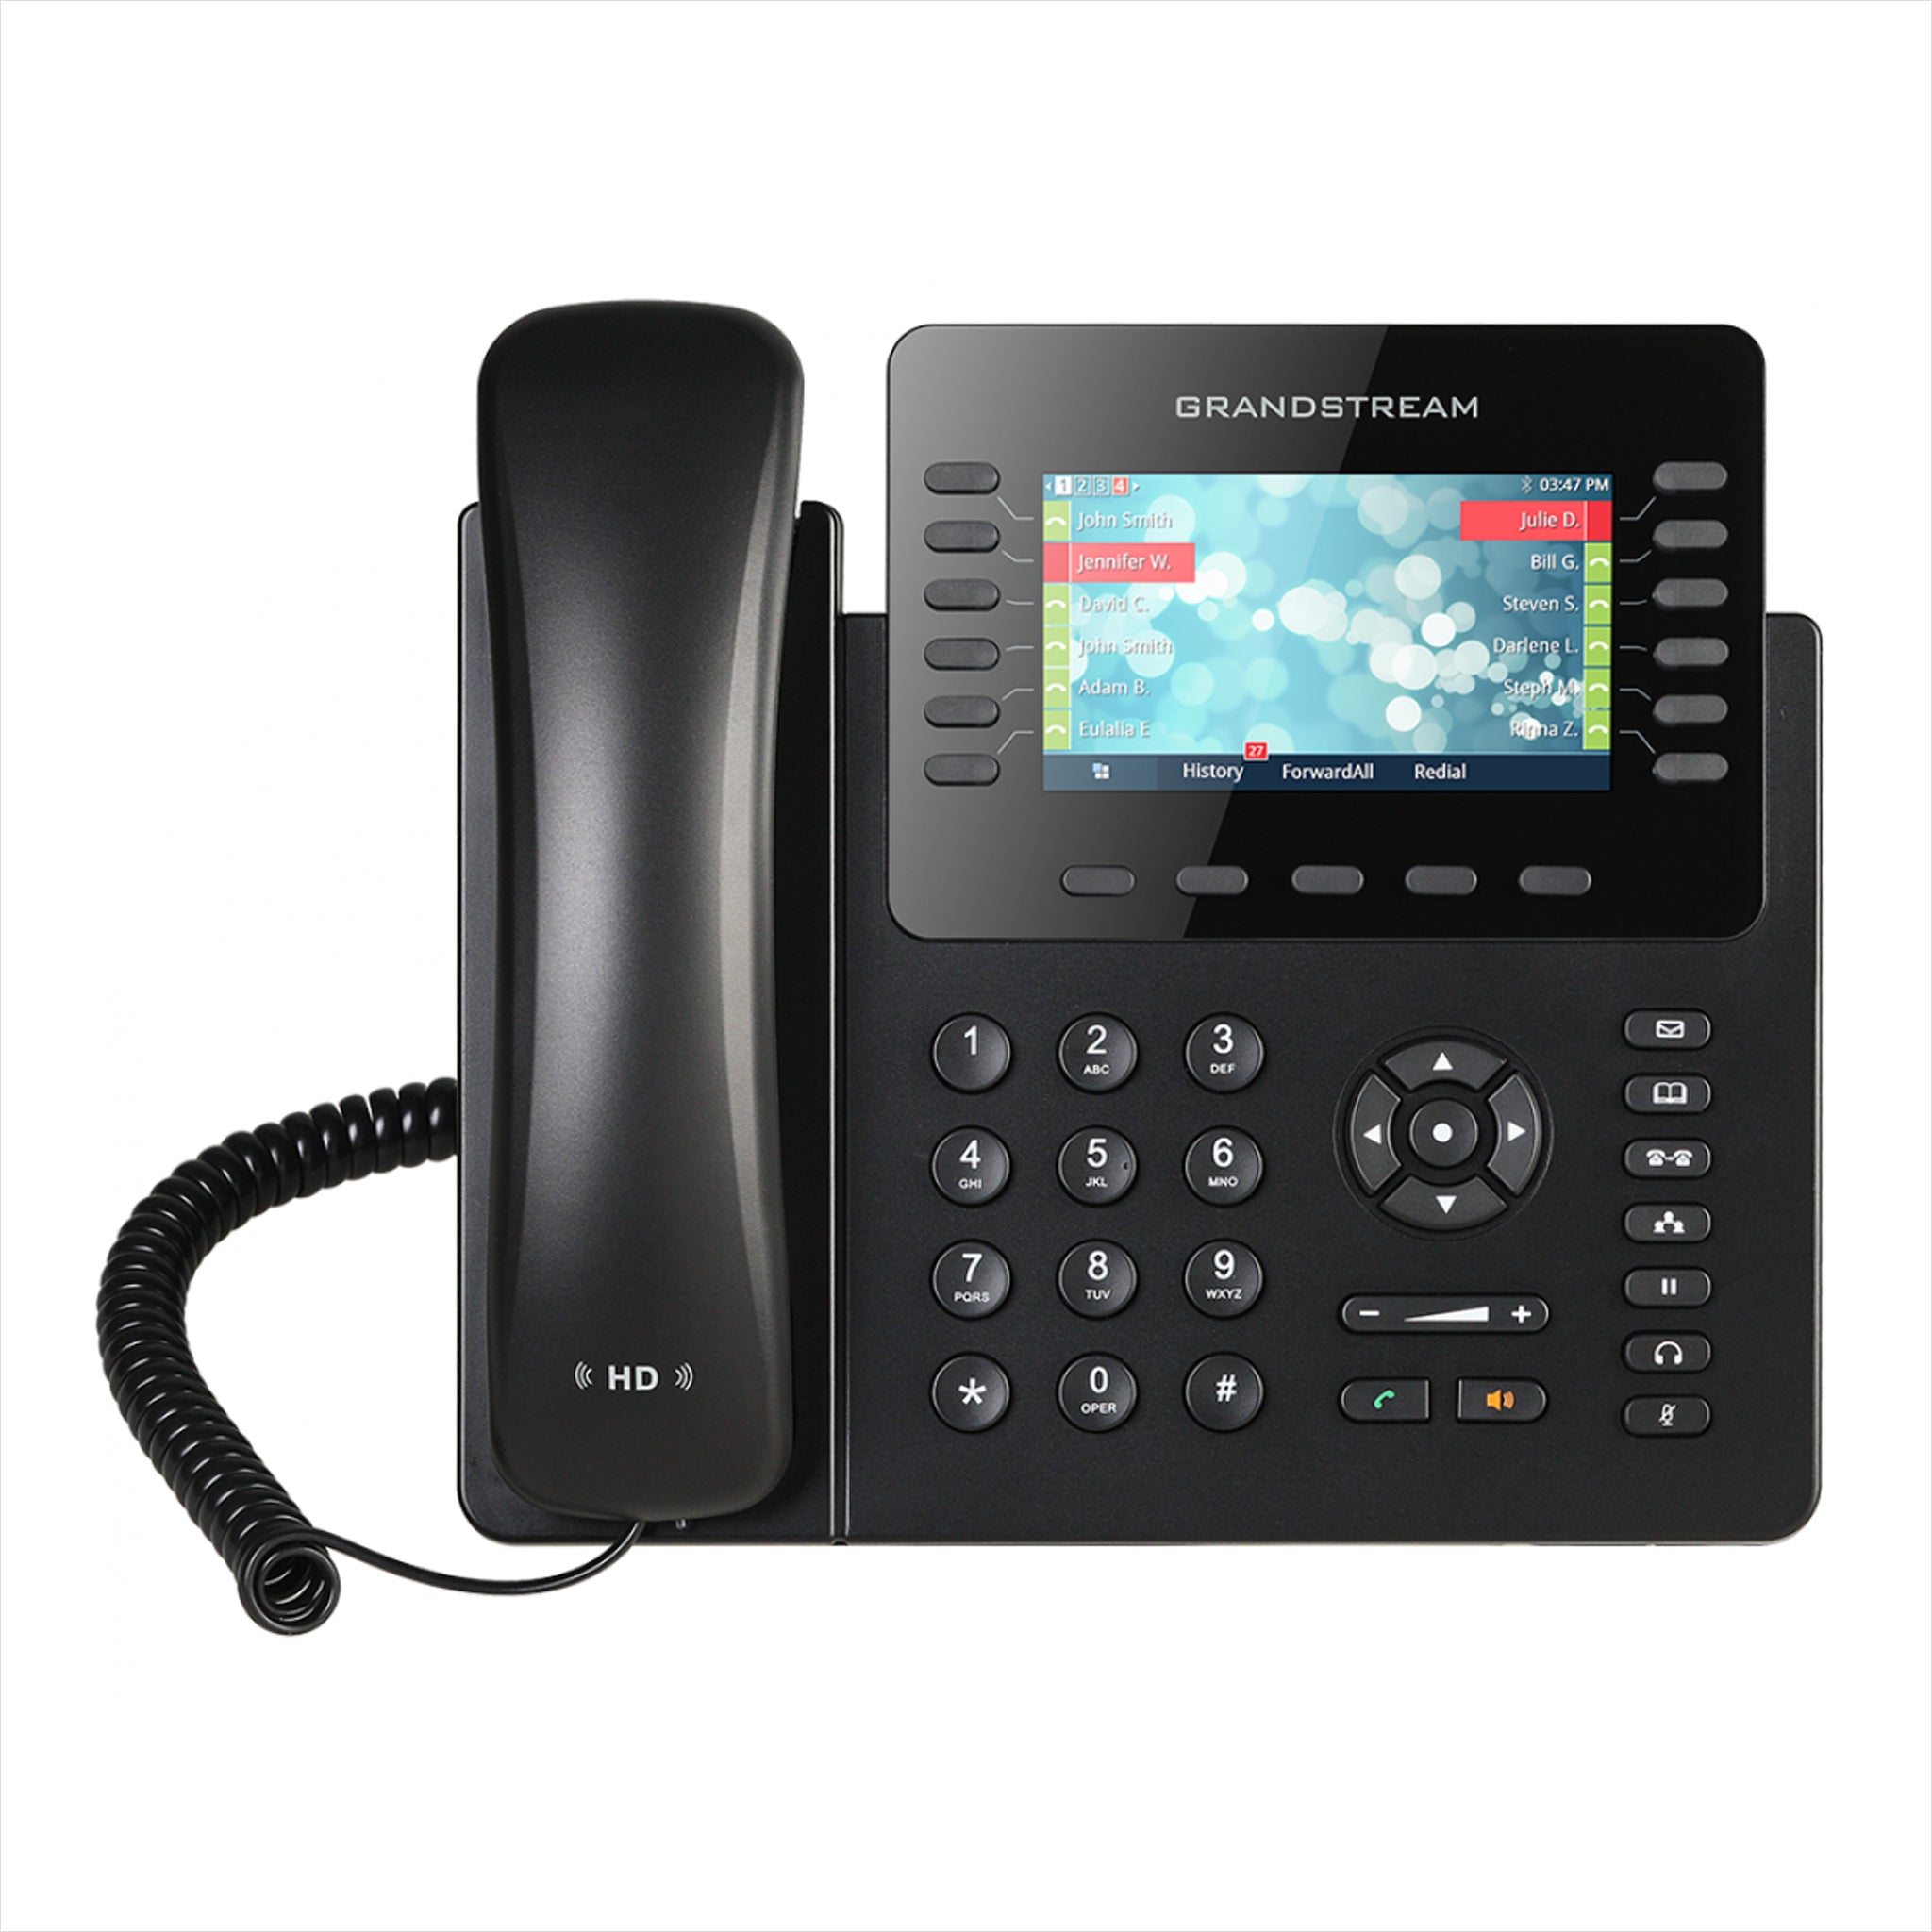 Grandstream GXP2170 - High-End IP Phone GXP2170, with PoE | AL-VoIP Store